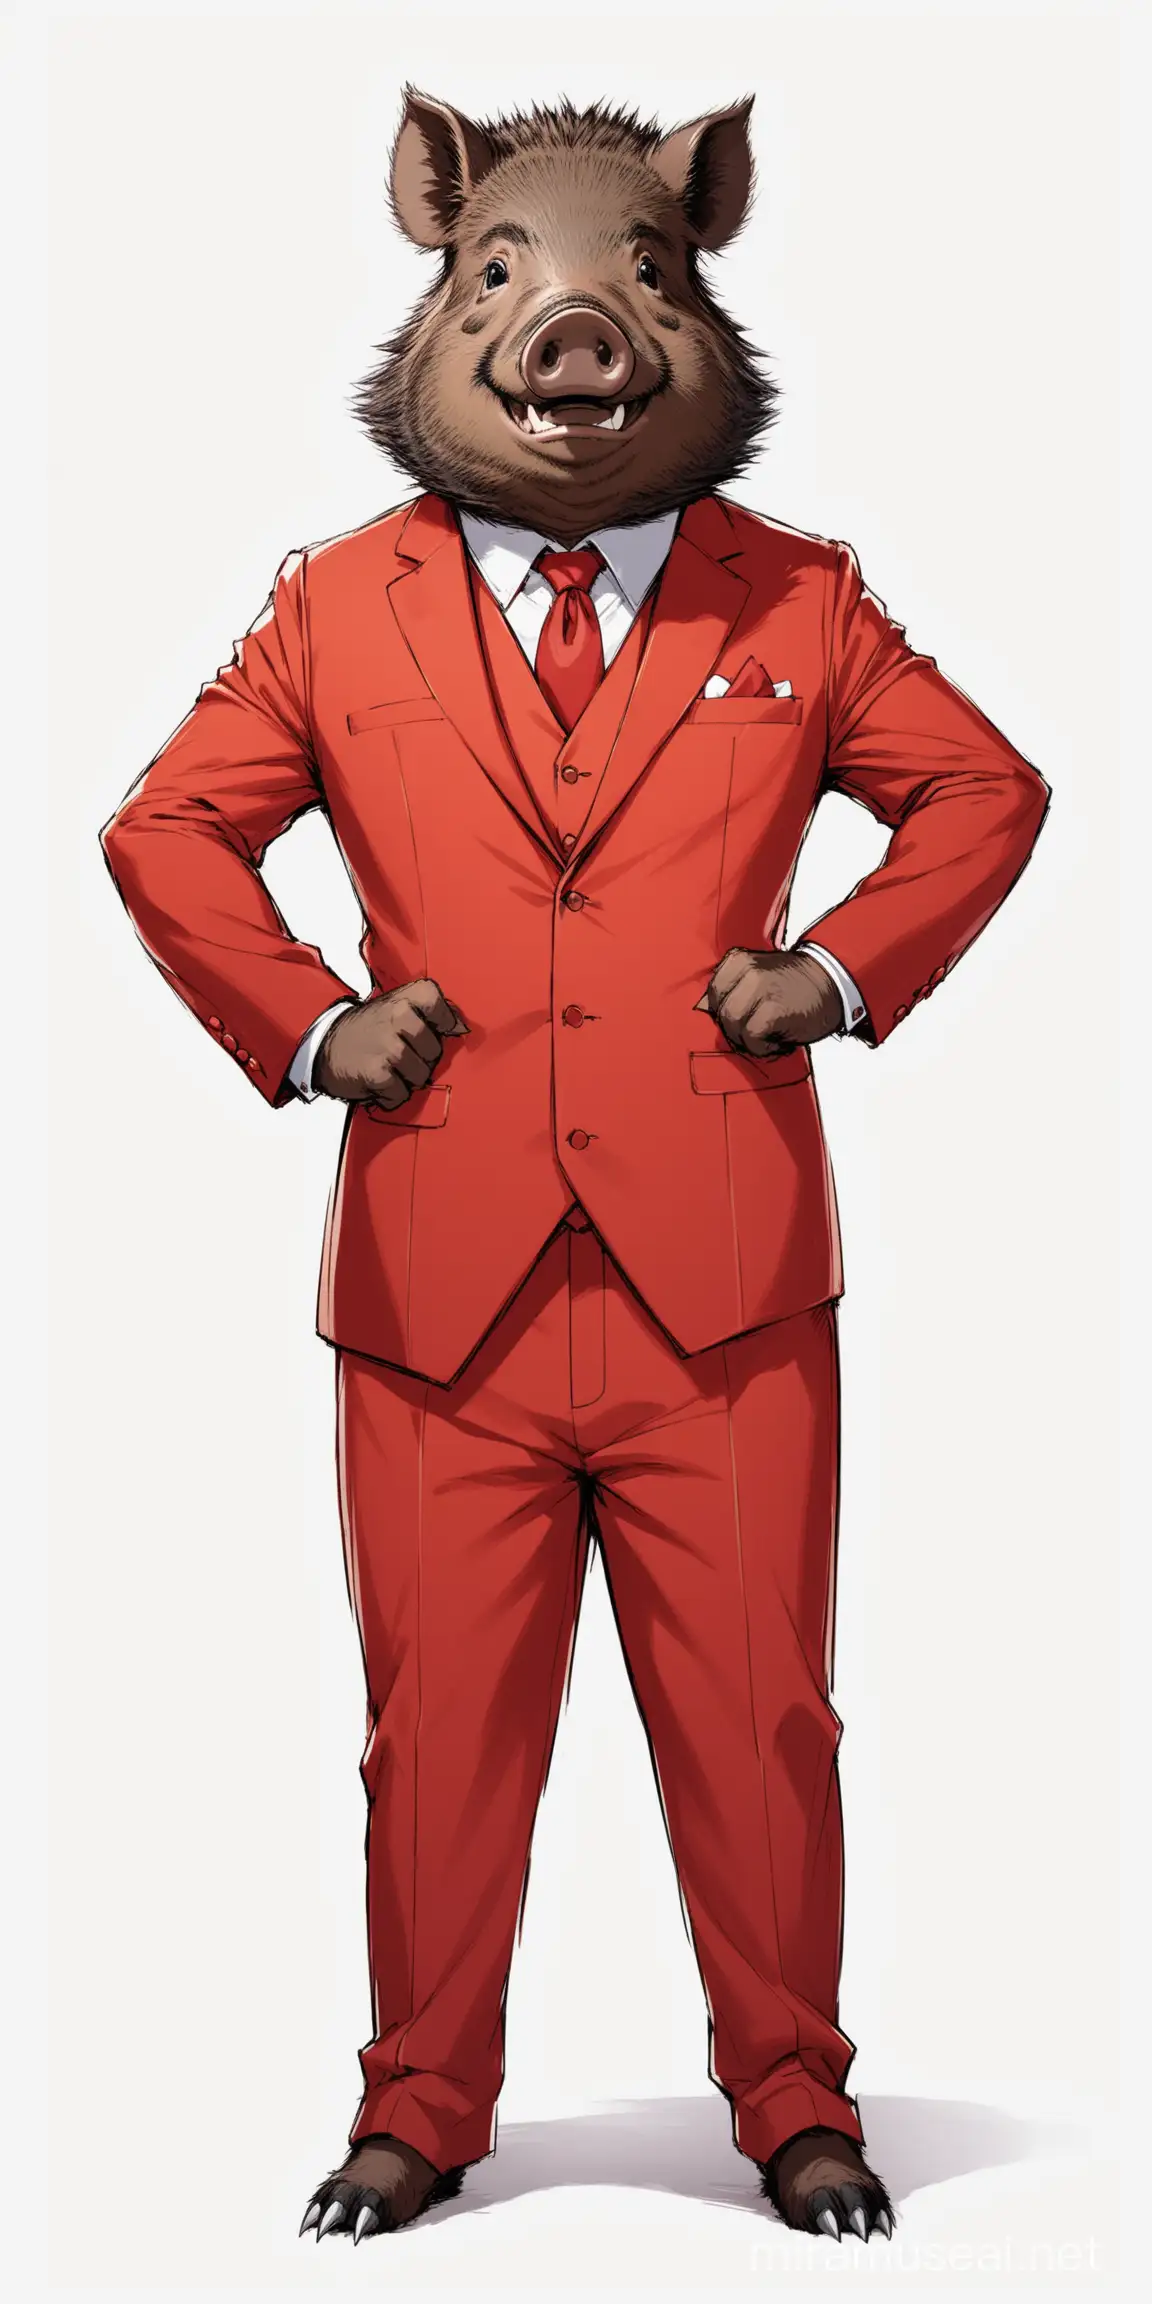 Wild Boar Dressed in Red ThreePiece Suit Smiling